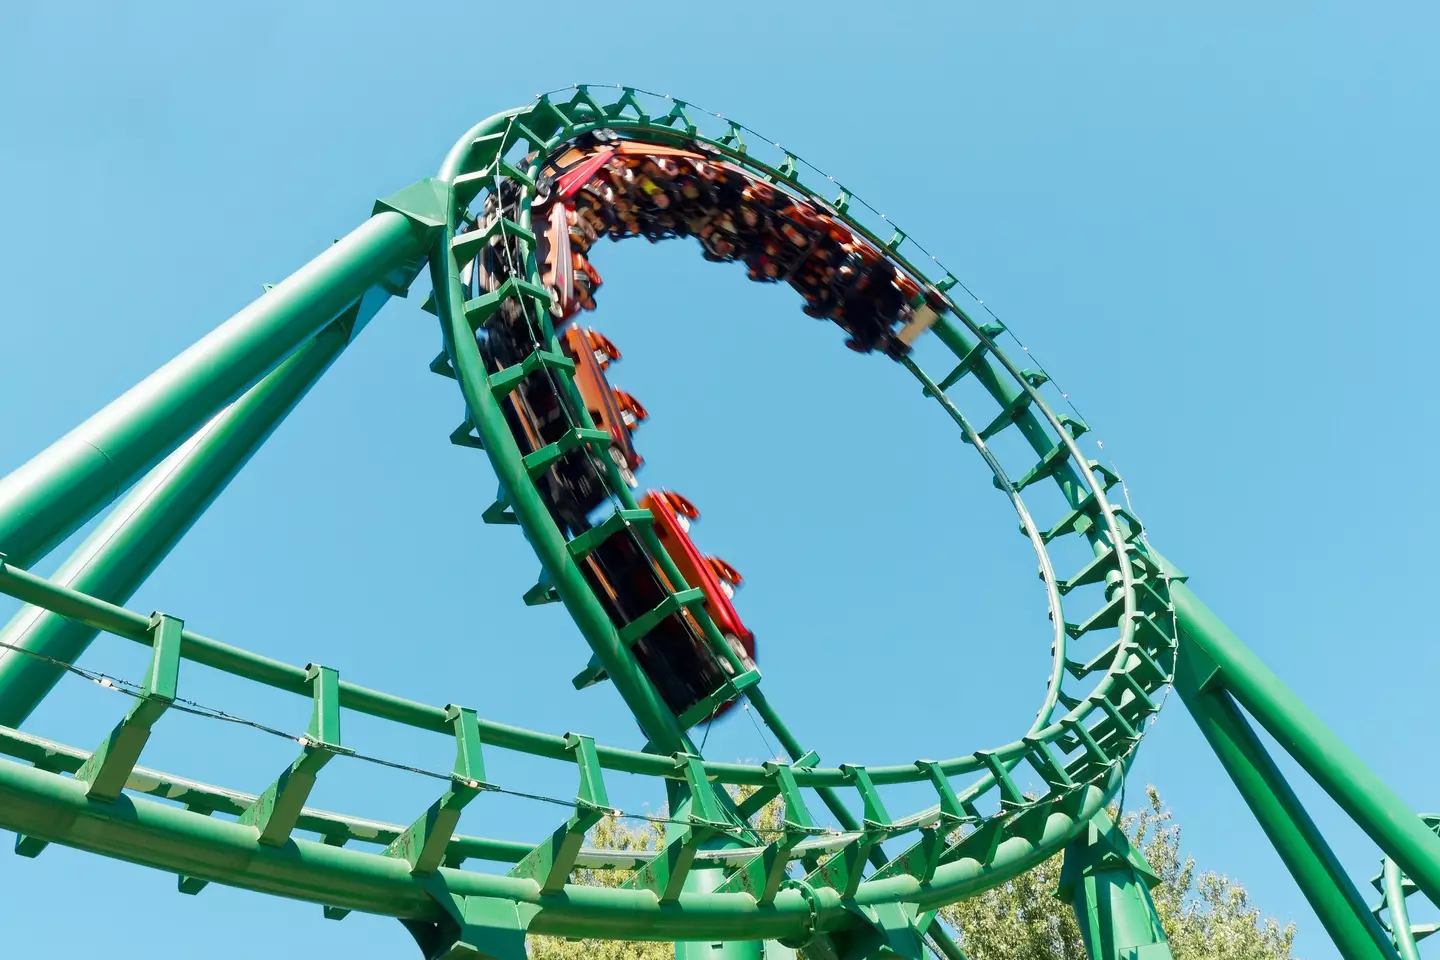 This rollercoaster loop isn't a perfect circle, and that's a good thing.